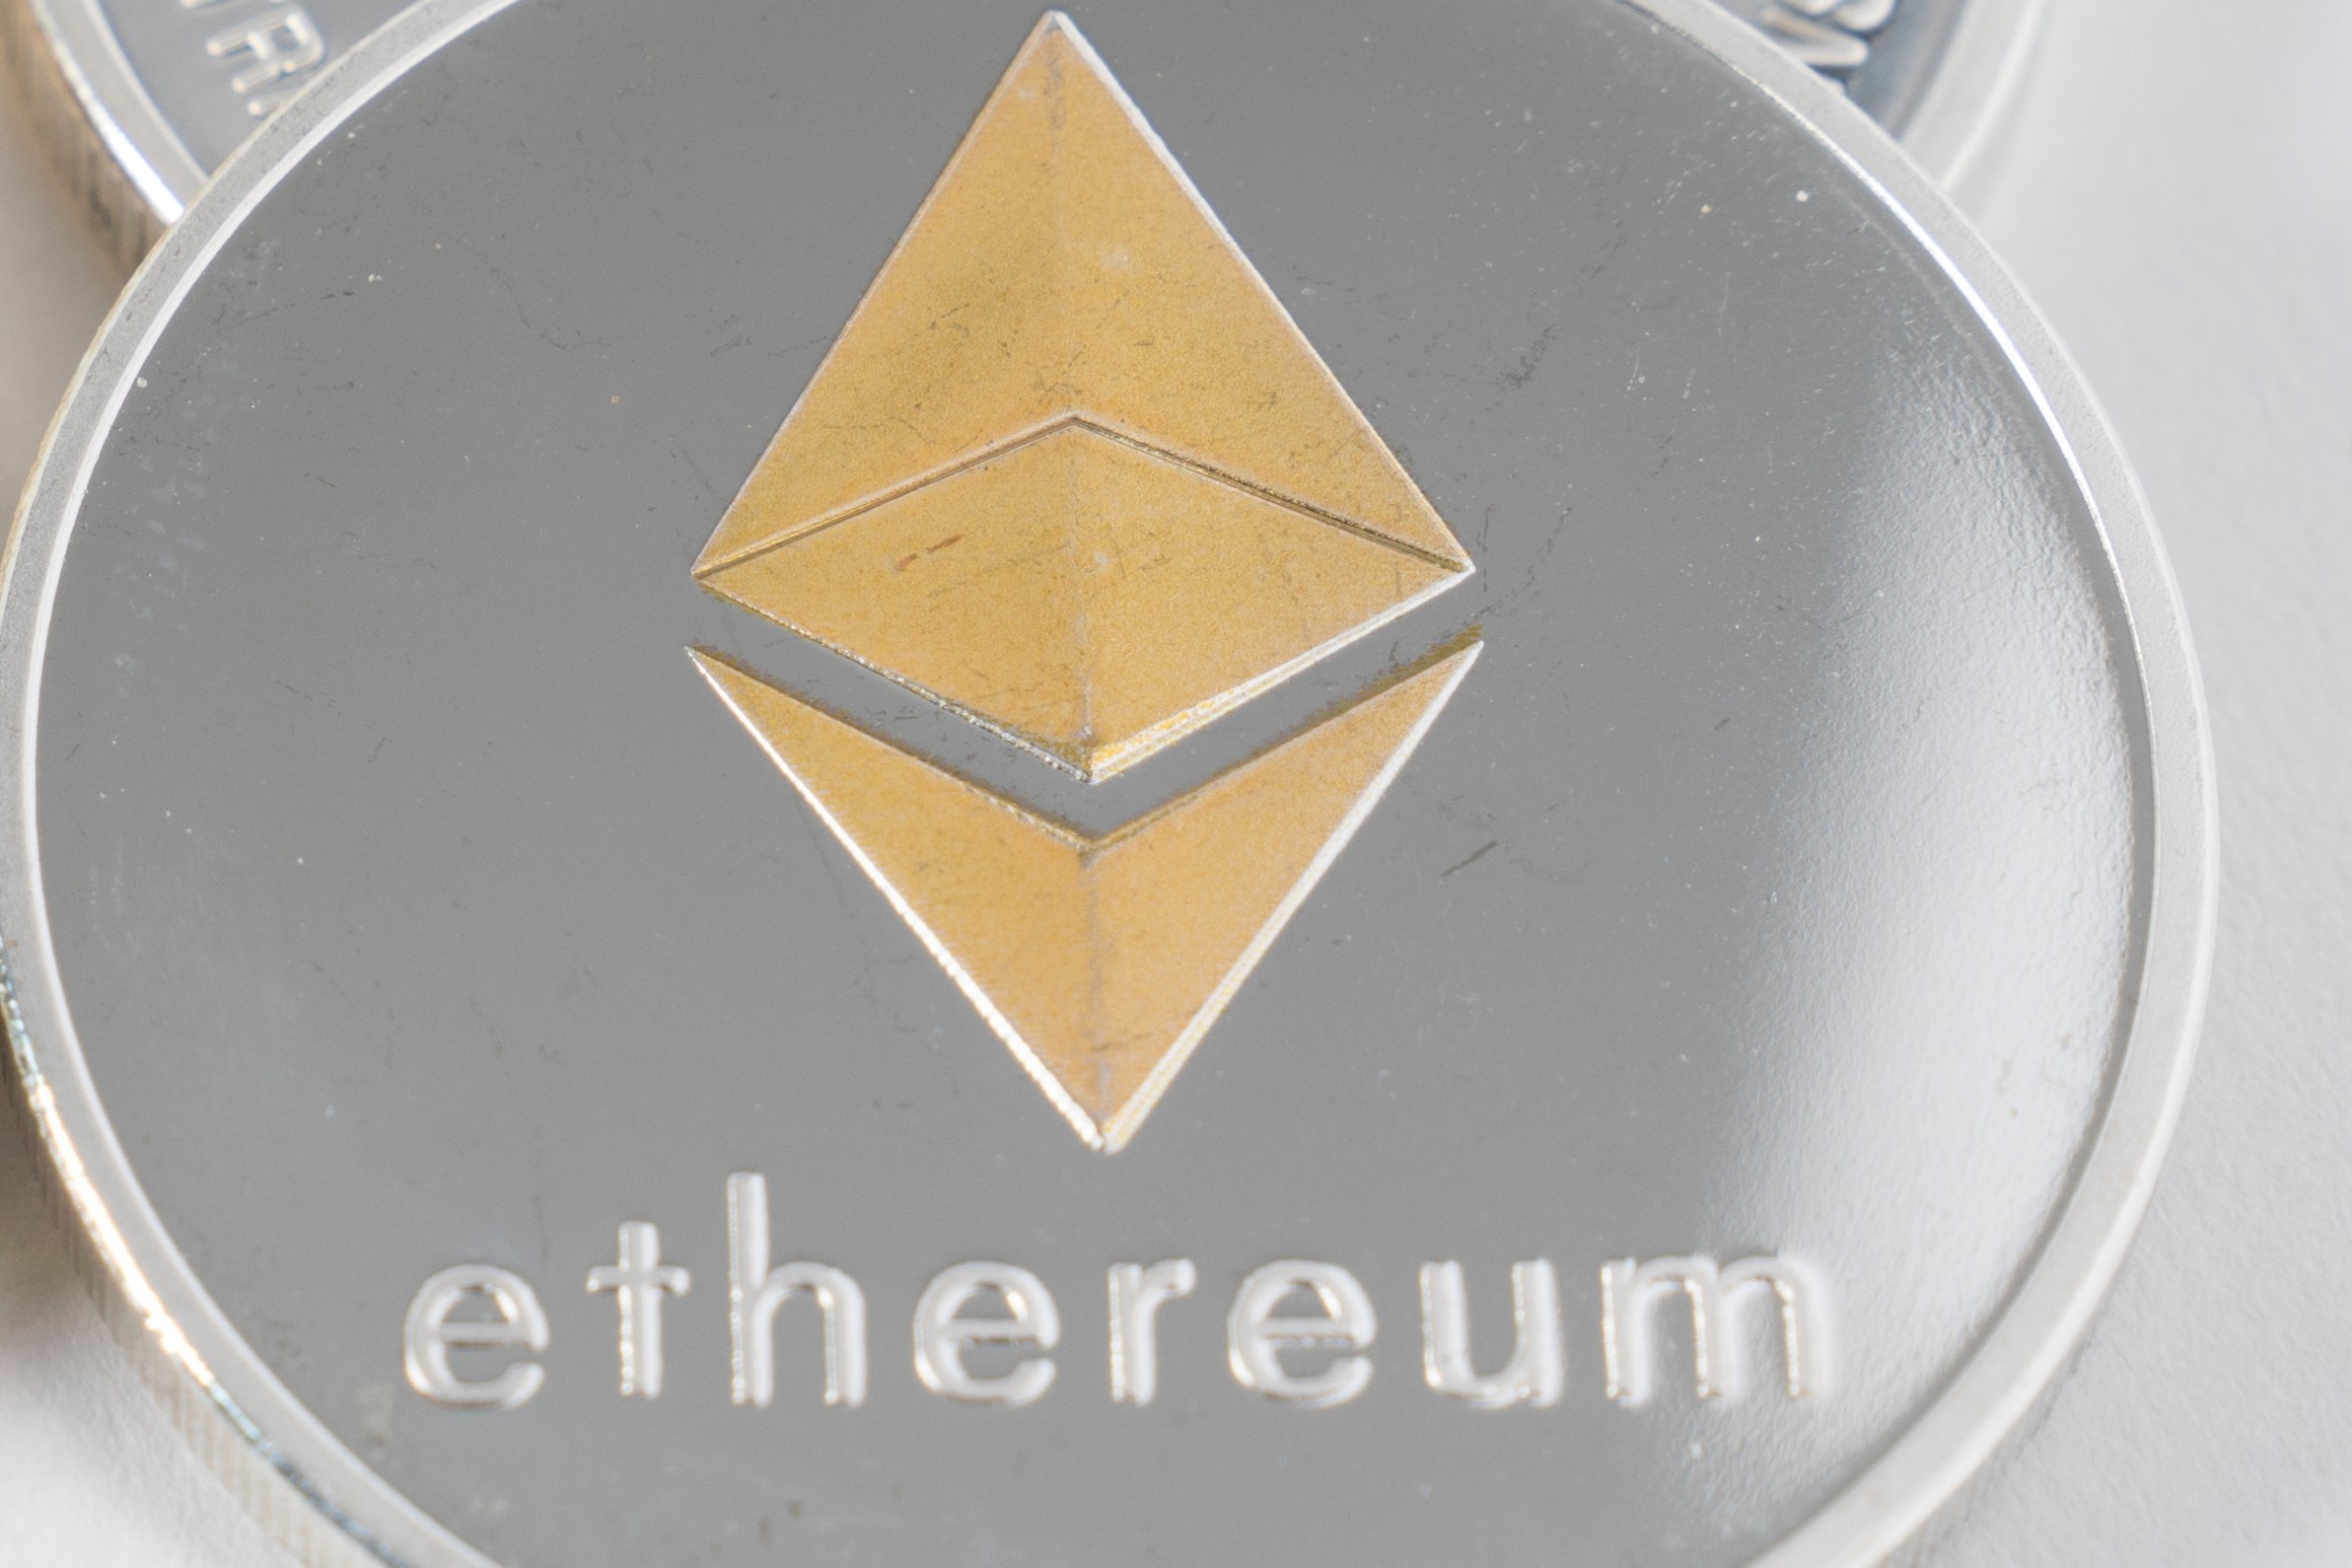 Ethereum Co-founder Lauds Qtum and VeChain, Welcomes SEC Ruling